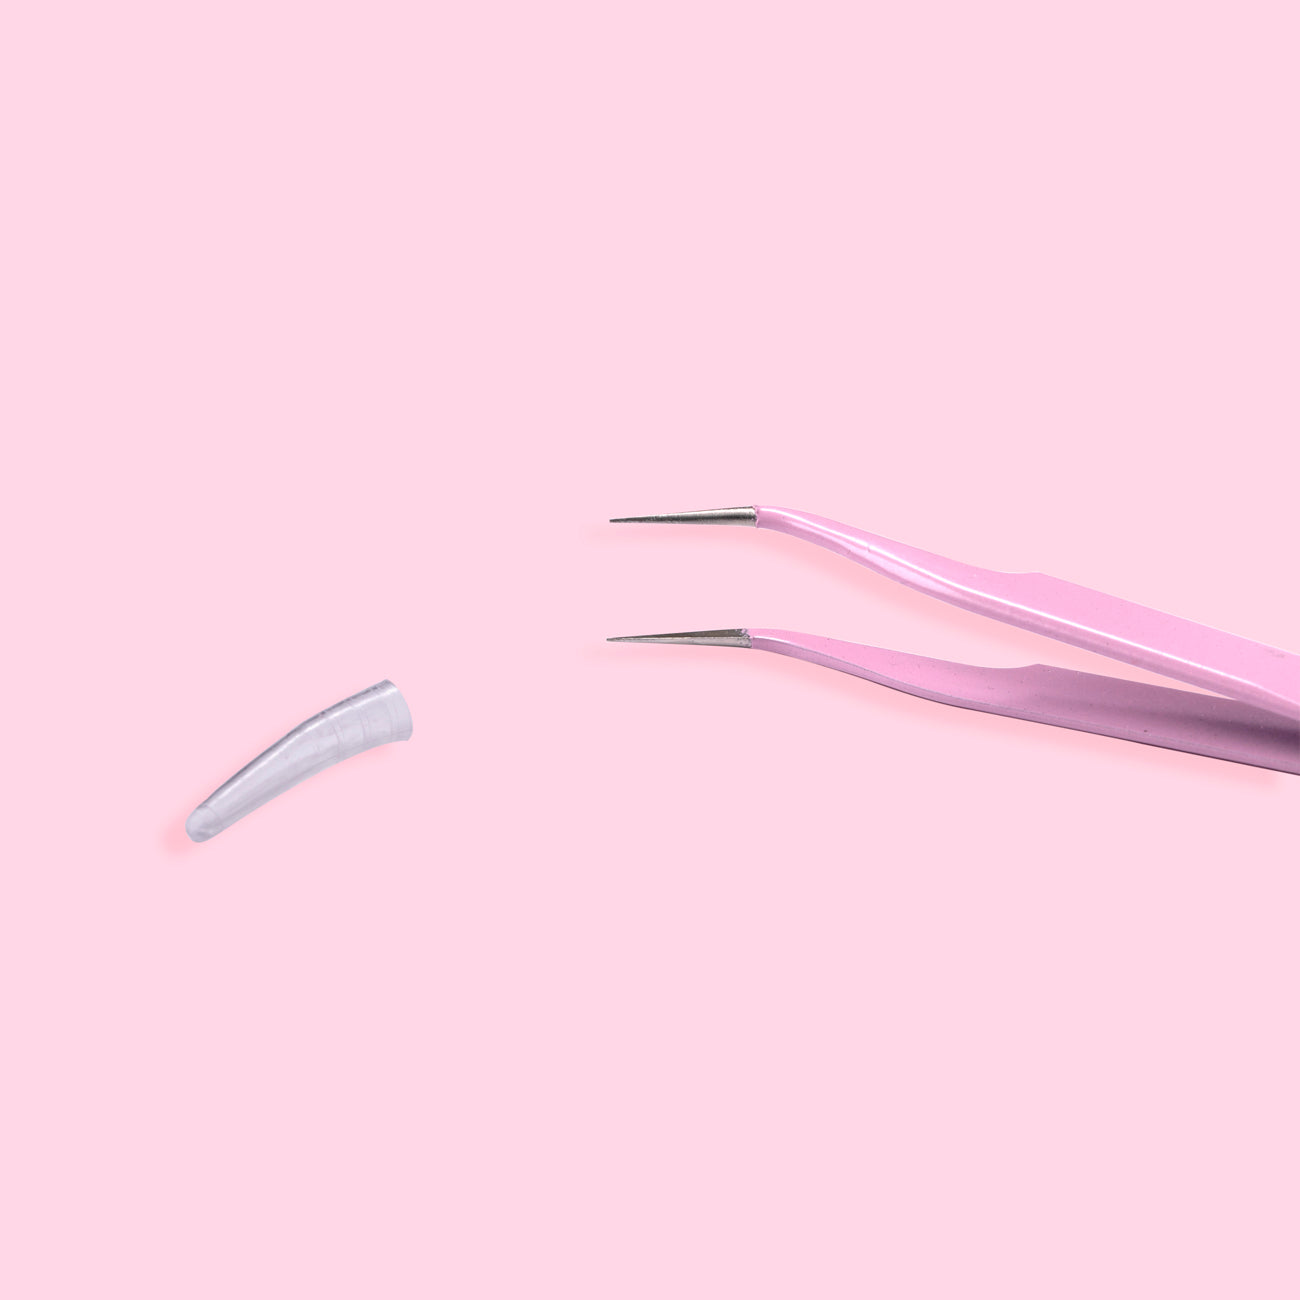 Curved Tweezer For Crafts. Buy Online. Cash on Delivery Available